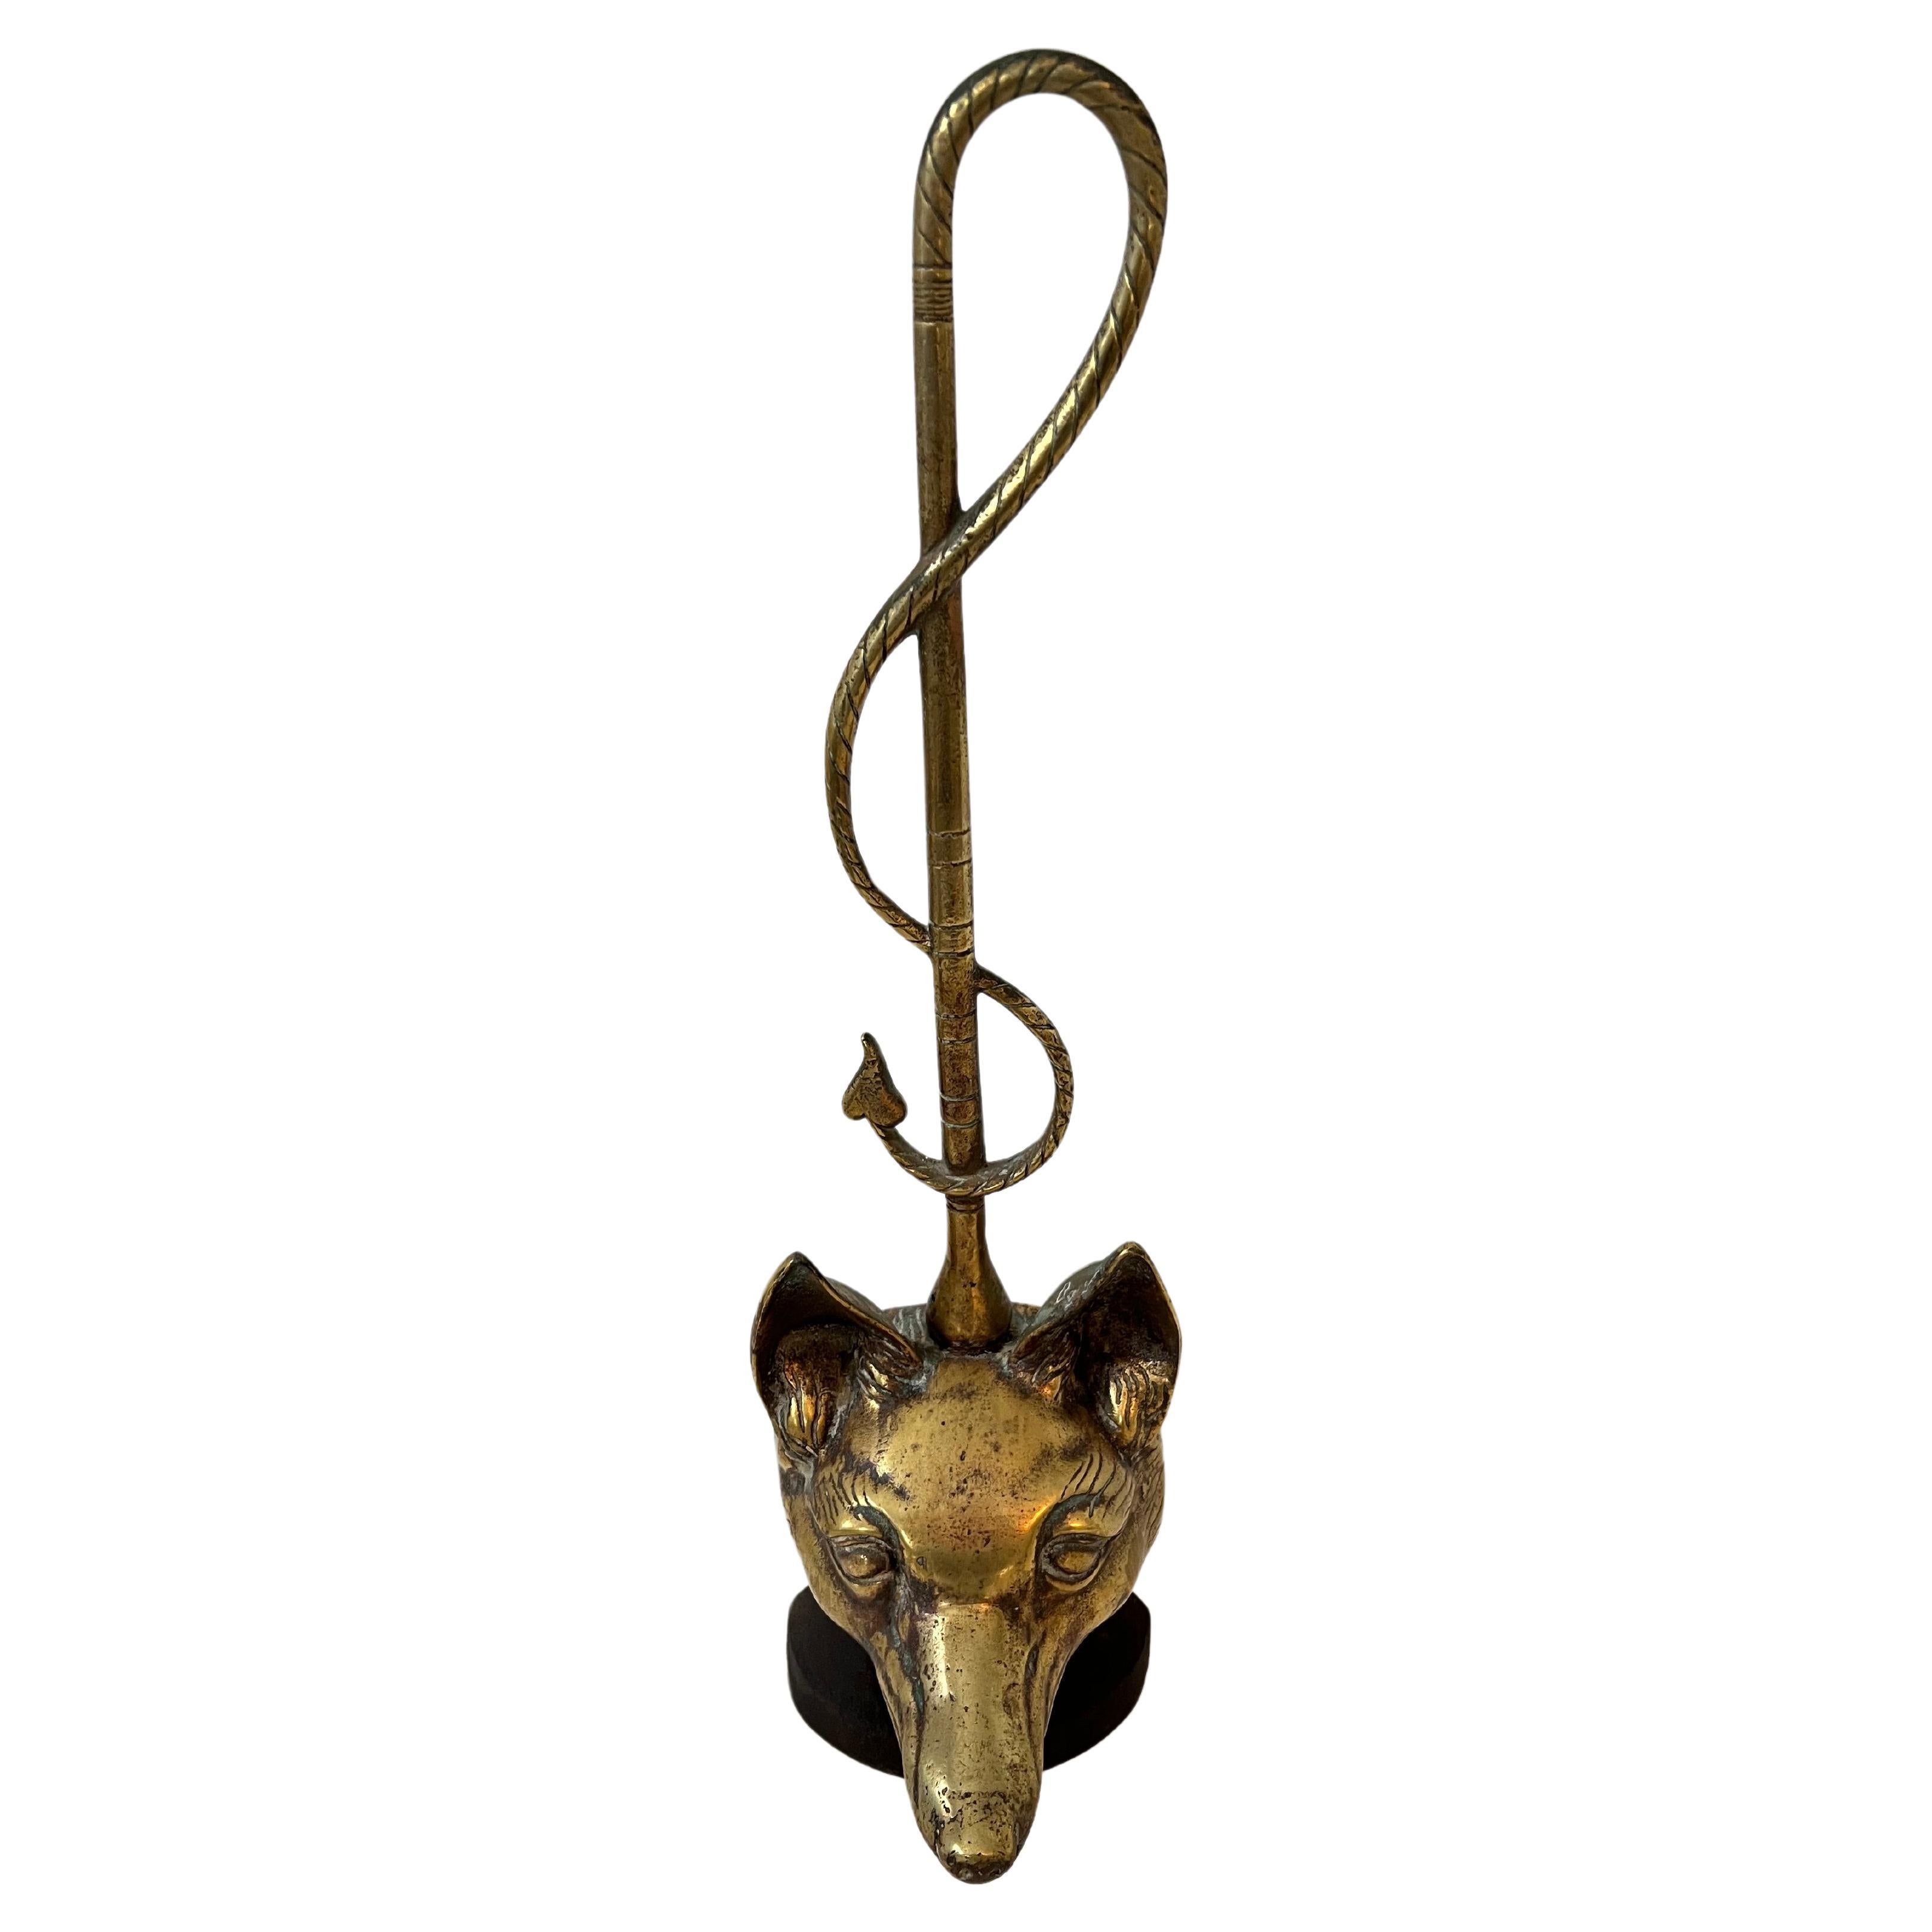 English Art Deco Brass Fox Door Stop With Riding Crop For Sale